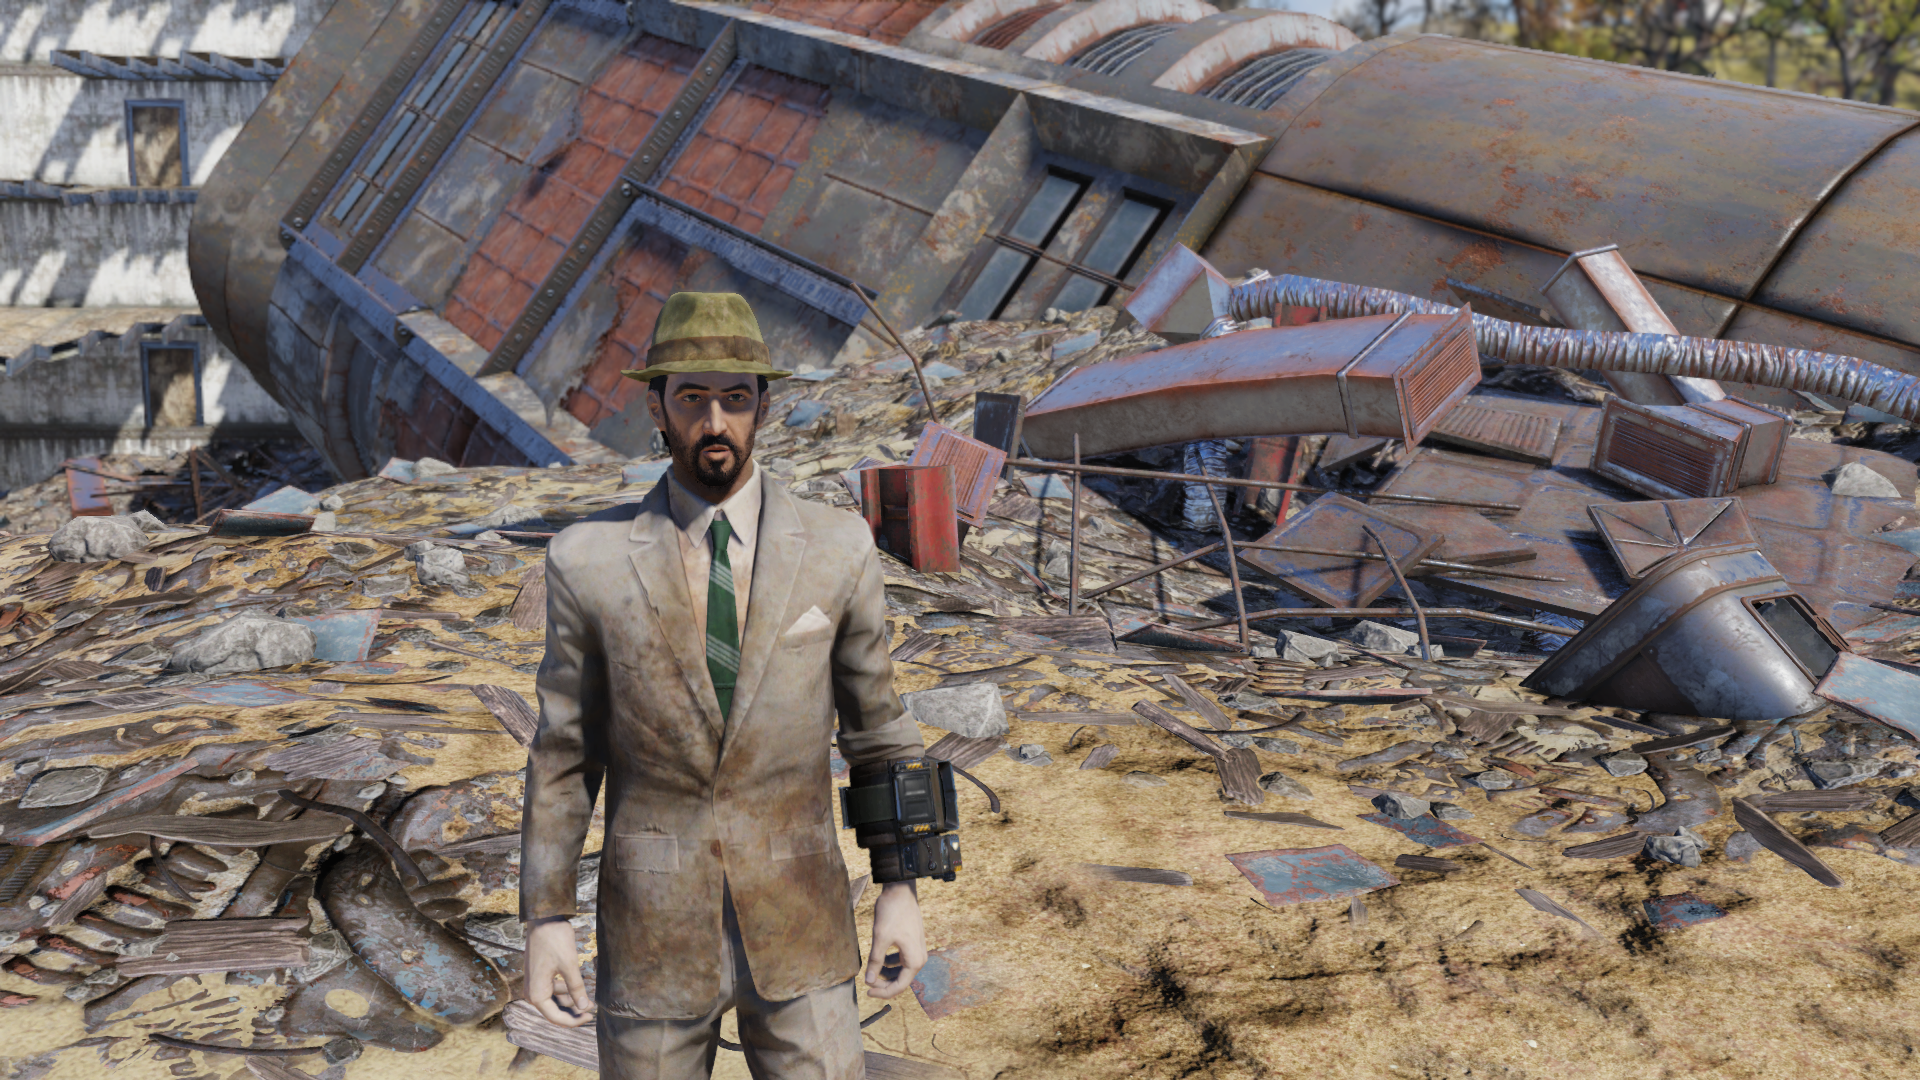 Fallout 76 early impressions: flawed but fun